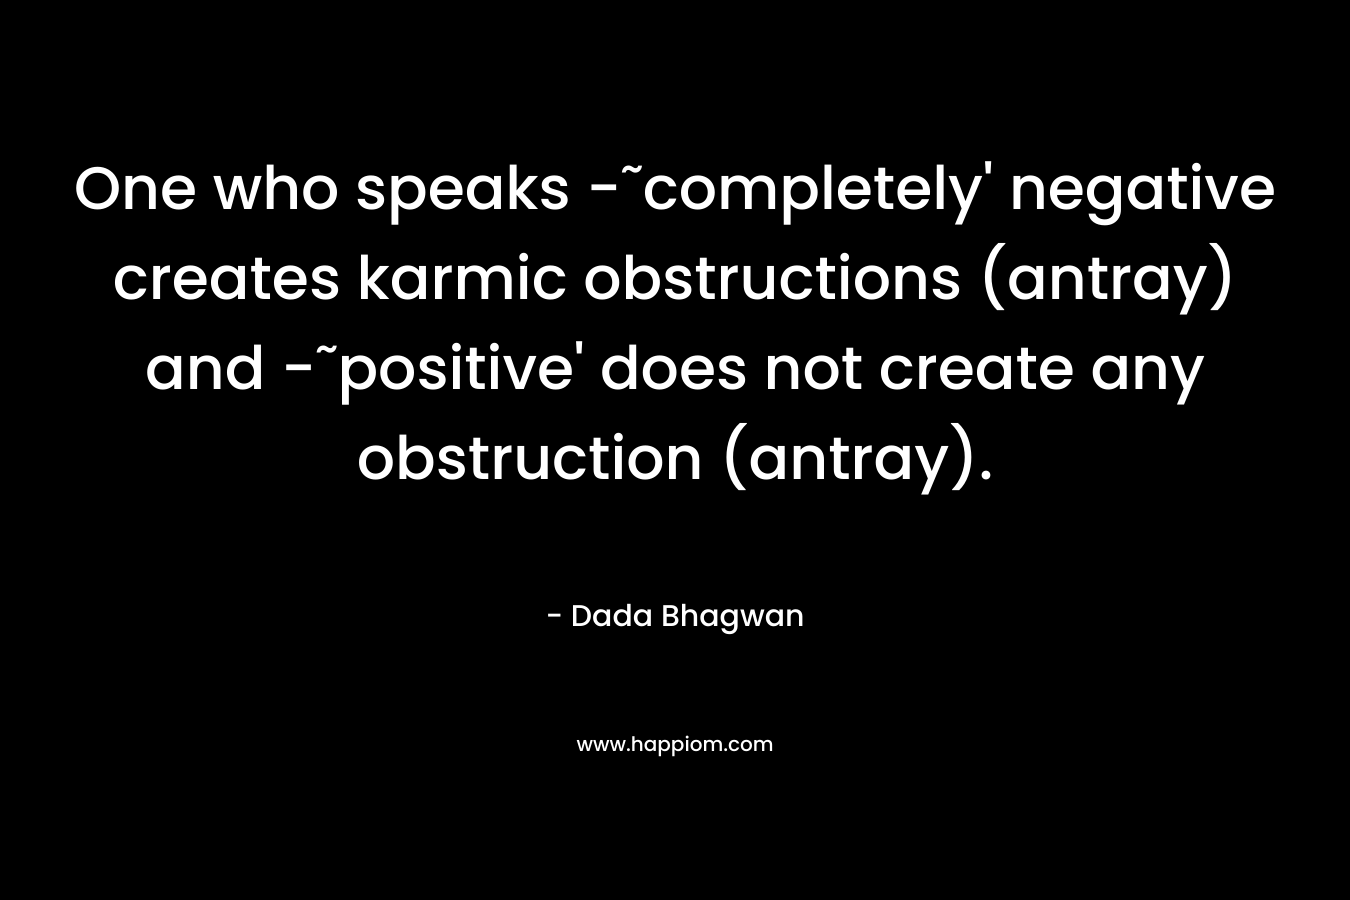 One who speaks -˜completely' negative creates karmic obstructions (antray) and -˜positive' does not create any obstruction (antray).